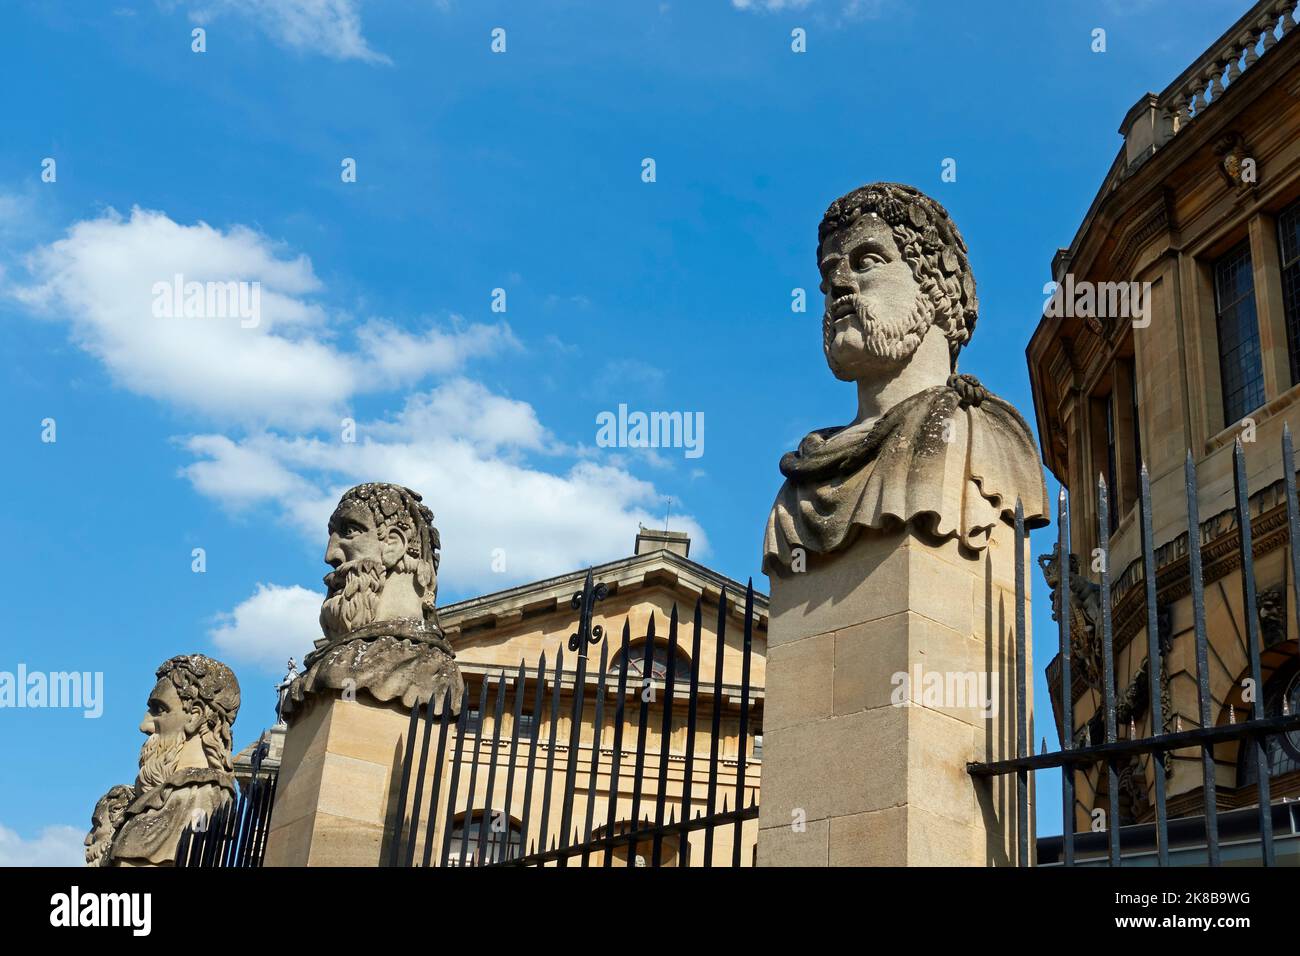 Three of the stone busts known as the 'Emperor Heads' outside the Sheldonian theatre, Broad St, University of Oxford, Oxford, Oxfordshire, England. Stock Photo